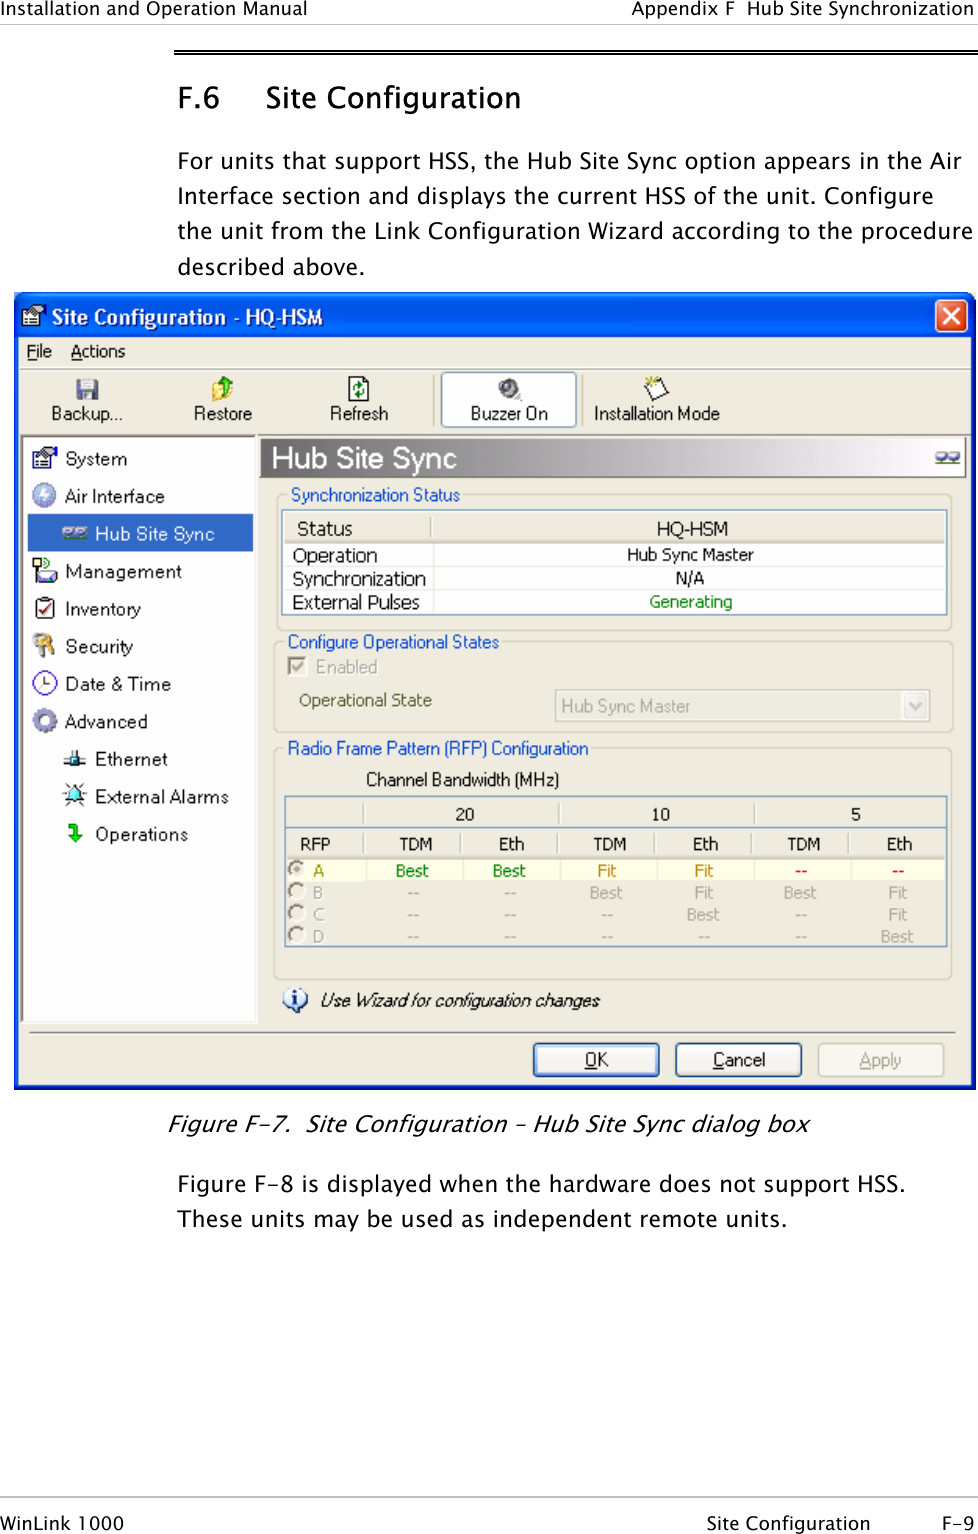 Installation and Operation Manual  Appendix  F  Hub Site Synchronization F.6 Site Configuration For units that support HSS, the Hub Site Sync option appears in the Air Interface section and displays the current HSS of the unit. Configure the unit from the Link Configuration Wizard according to the procedure described above.  Figure  F-7.  Site Configuration – Hub Site Sync dialog box Figure  F-8 is displayed when the hardware does not support HSS. These units may be used as independent remote units. WinLink 1000  Site Configuration  F-9 